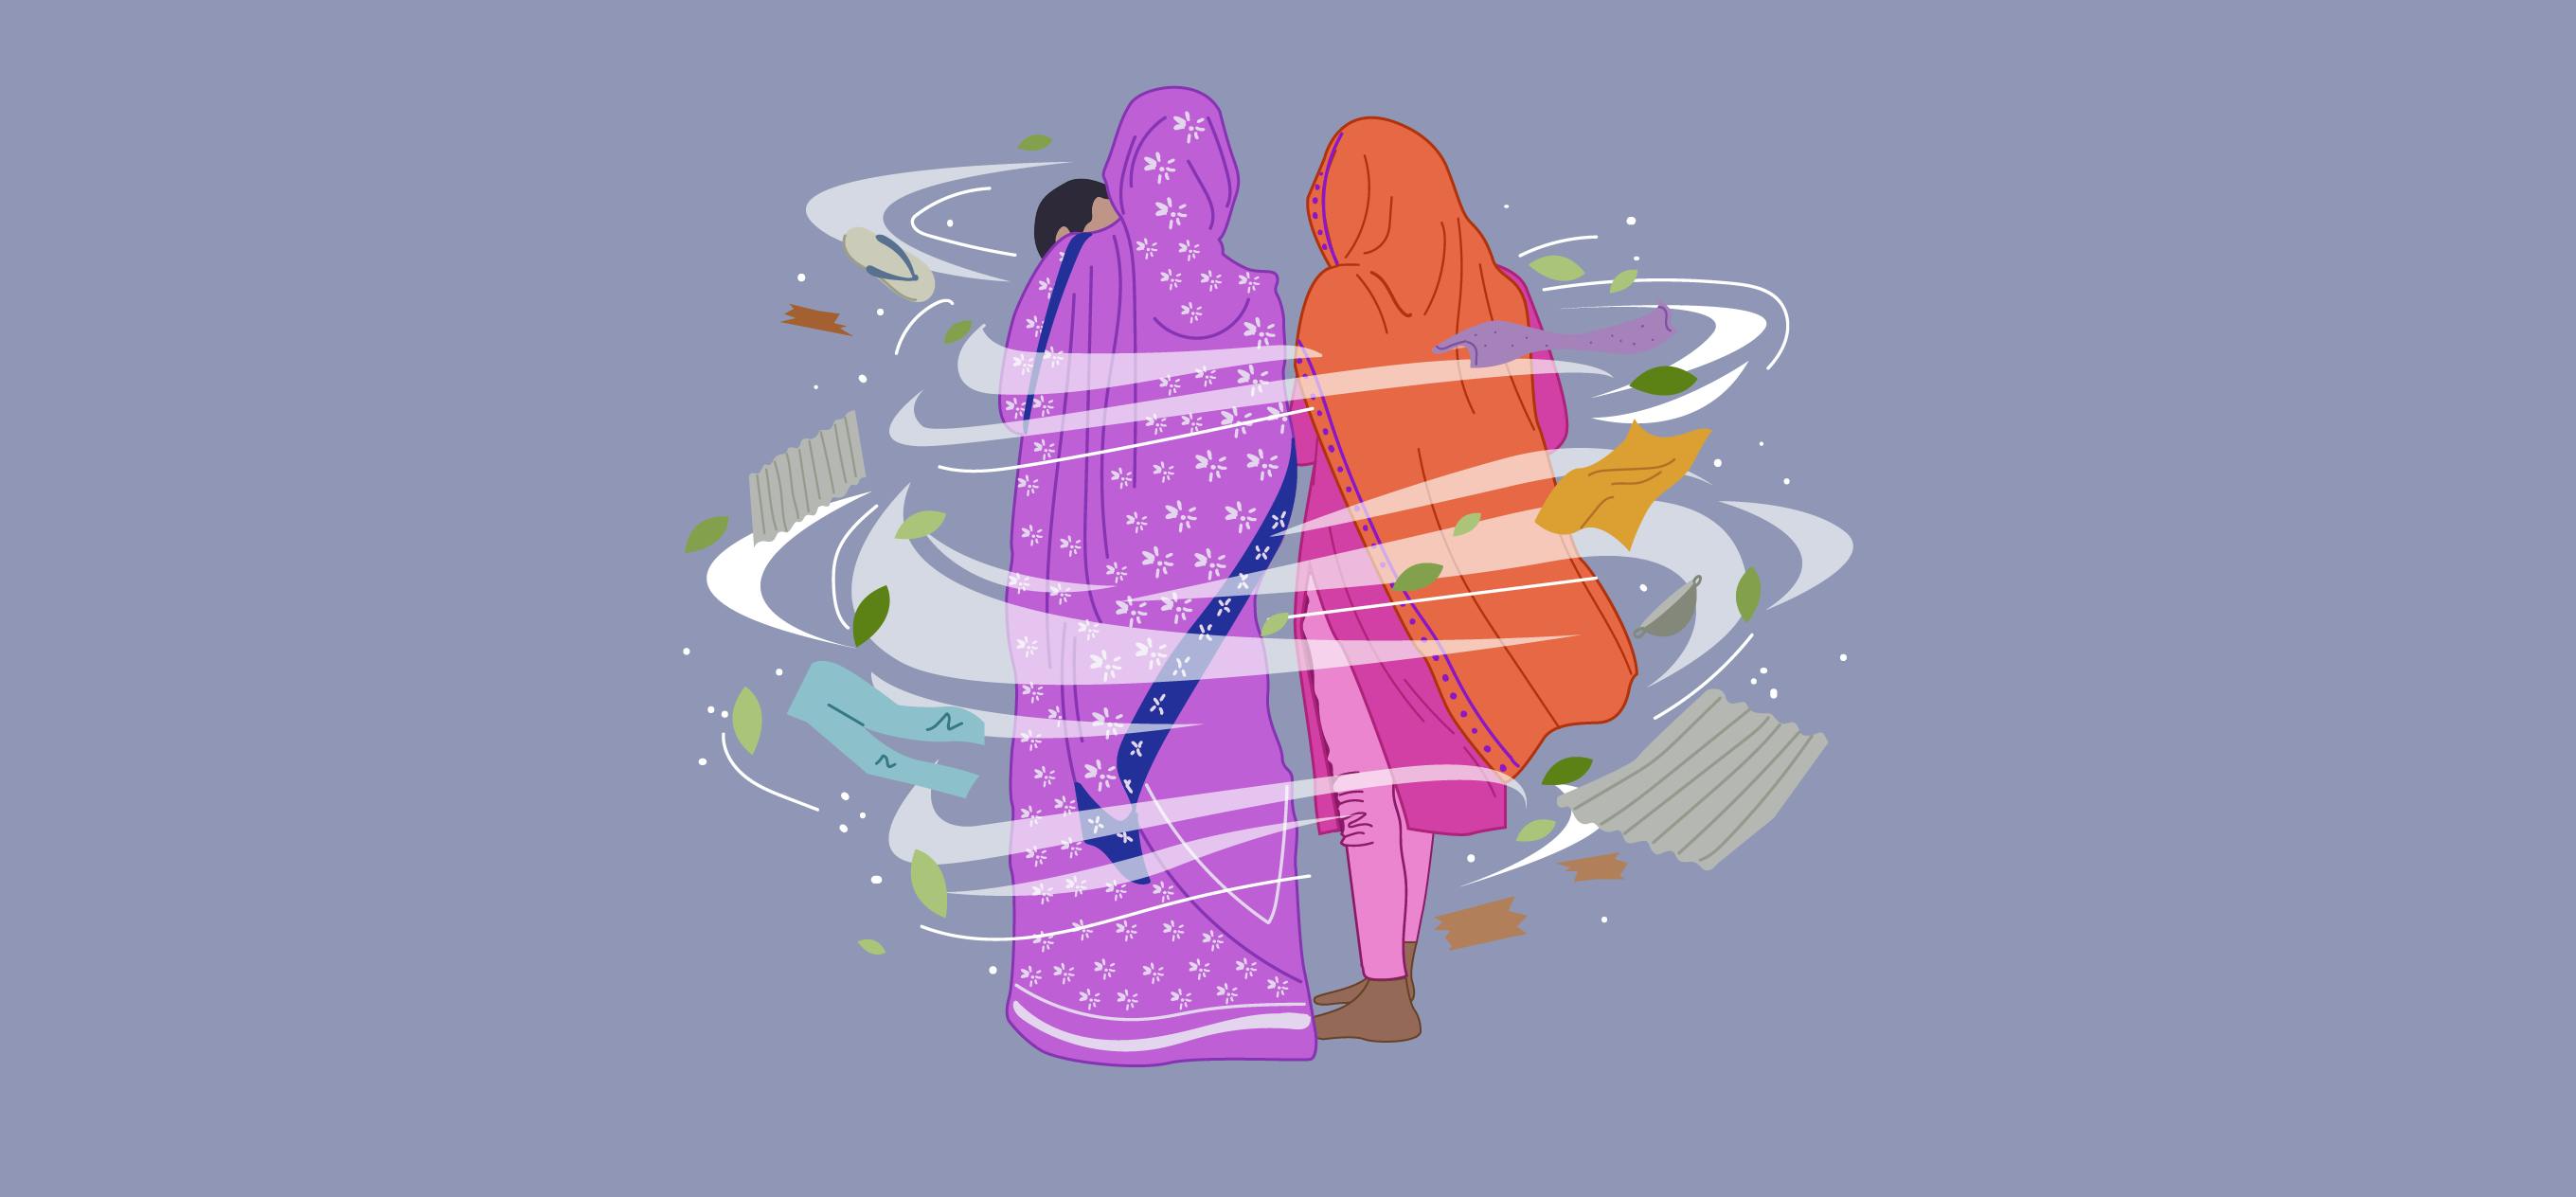 Storm Cycle by Ritwika Mitra; Illustration by Akshaya Zachariah for FiftyTwo.in